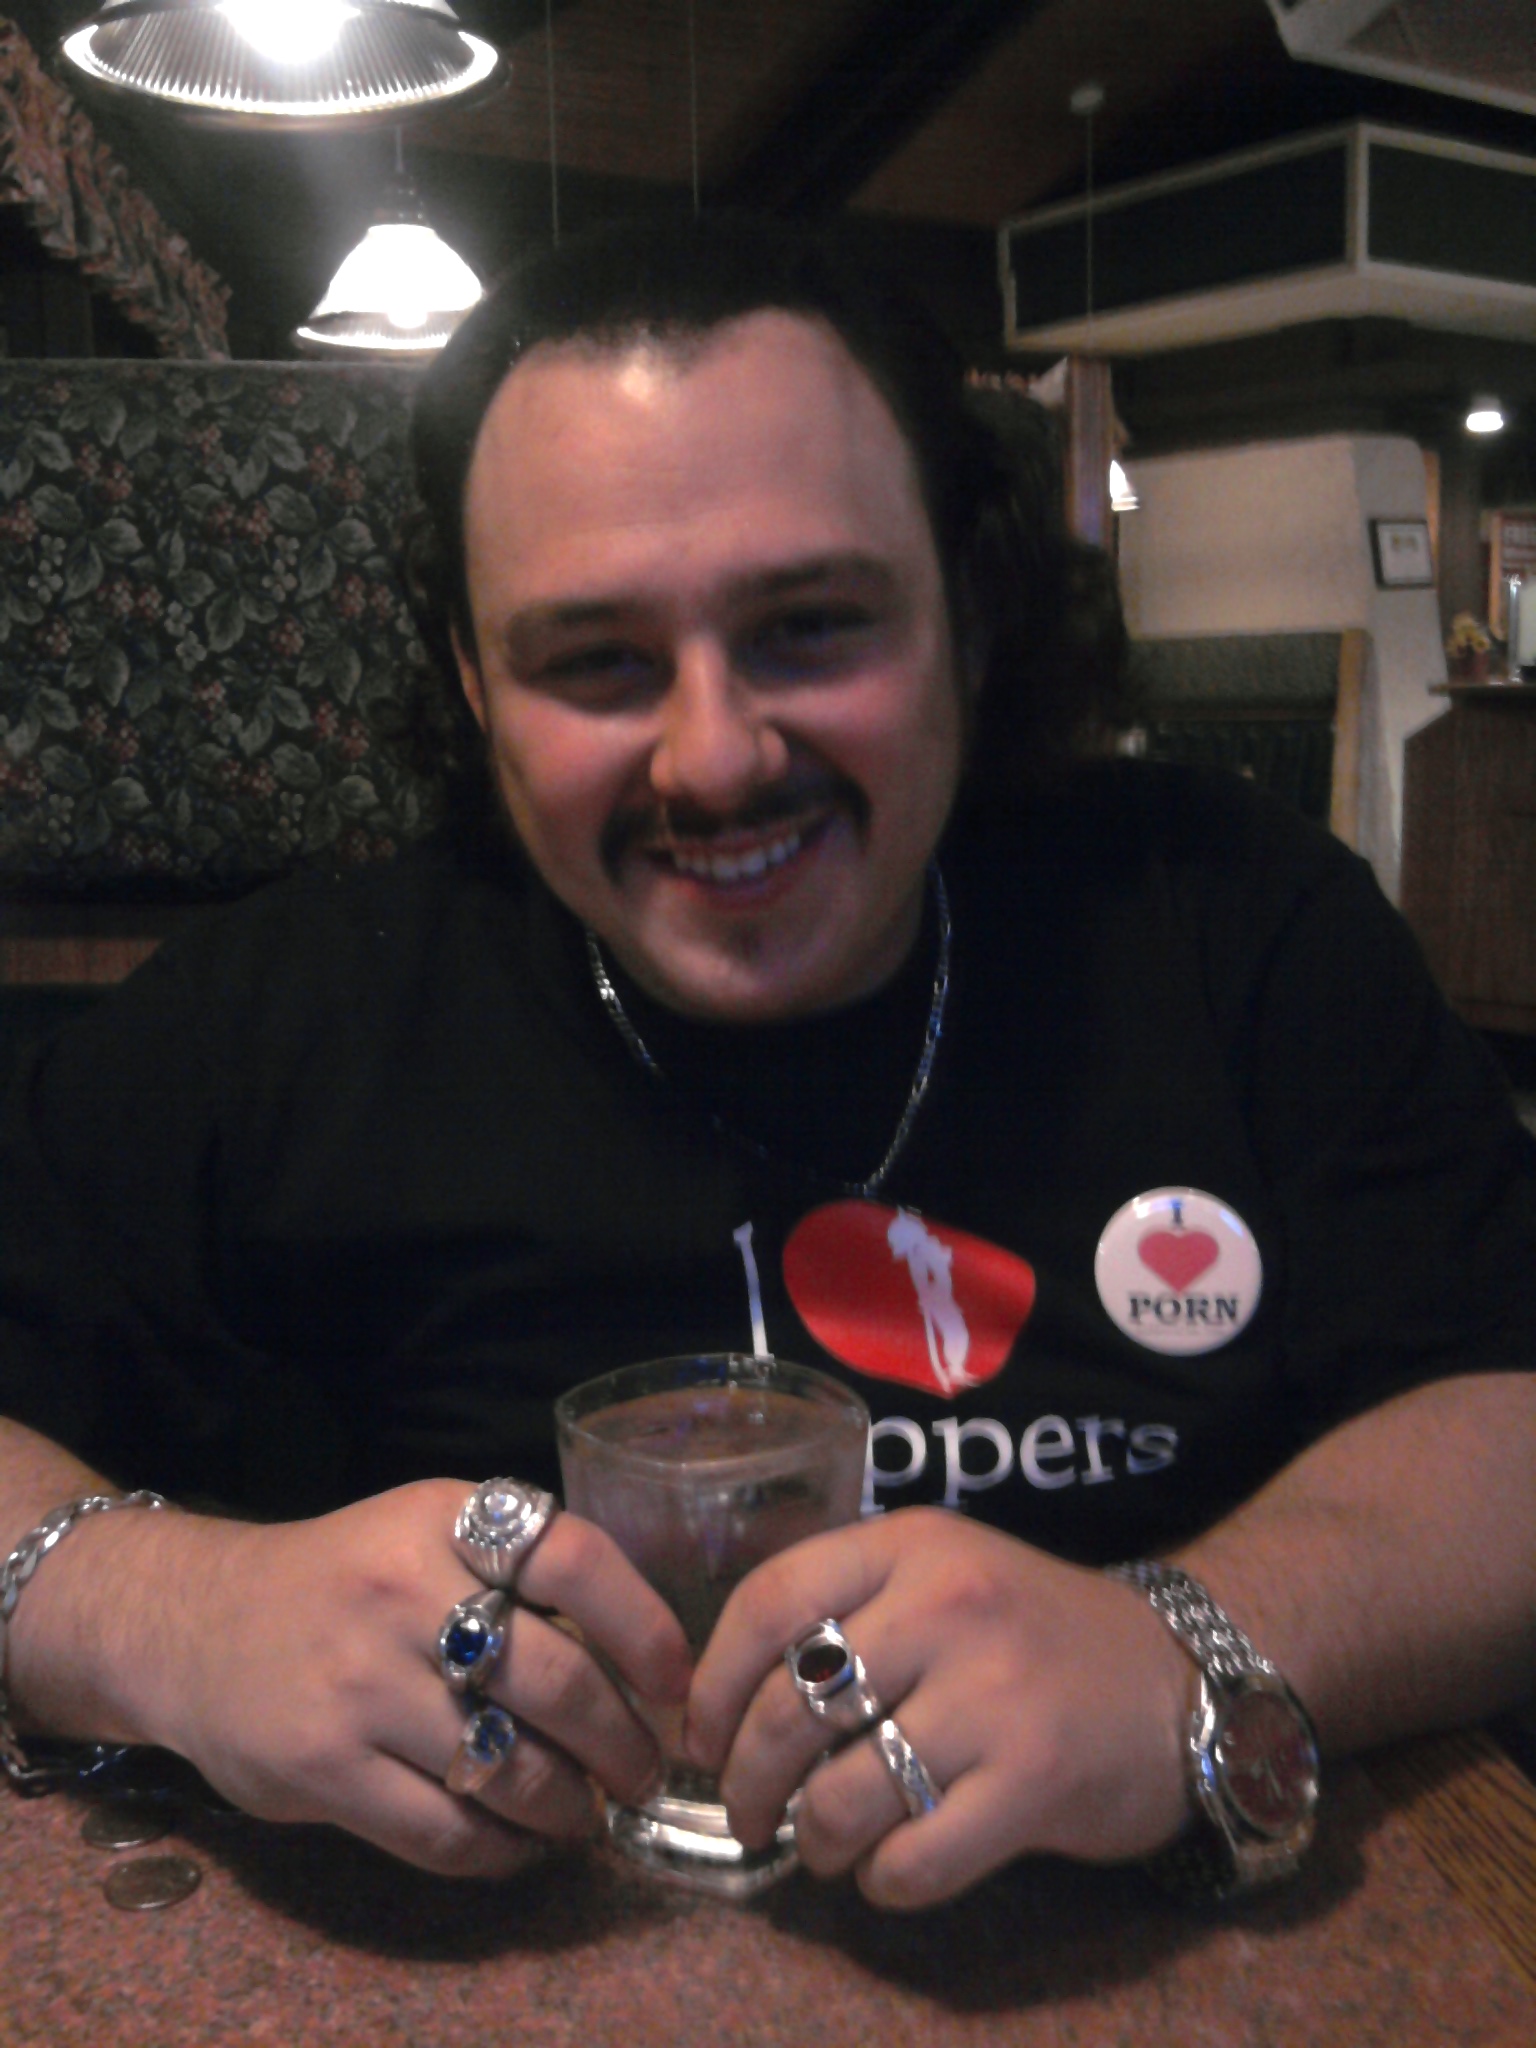 A close up of me Dressed up as Ron Jeremy on Halloween. I've met him twice in person and yes, he really does wear multiple rings on his fingers.